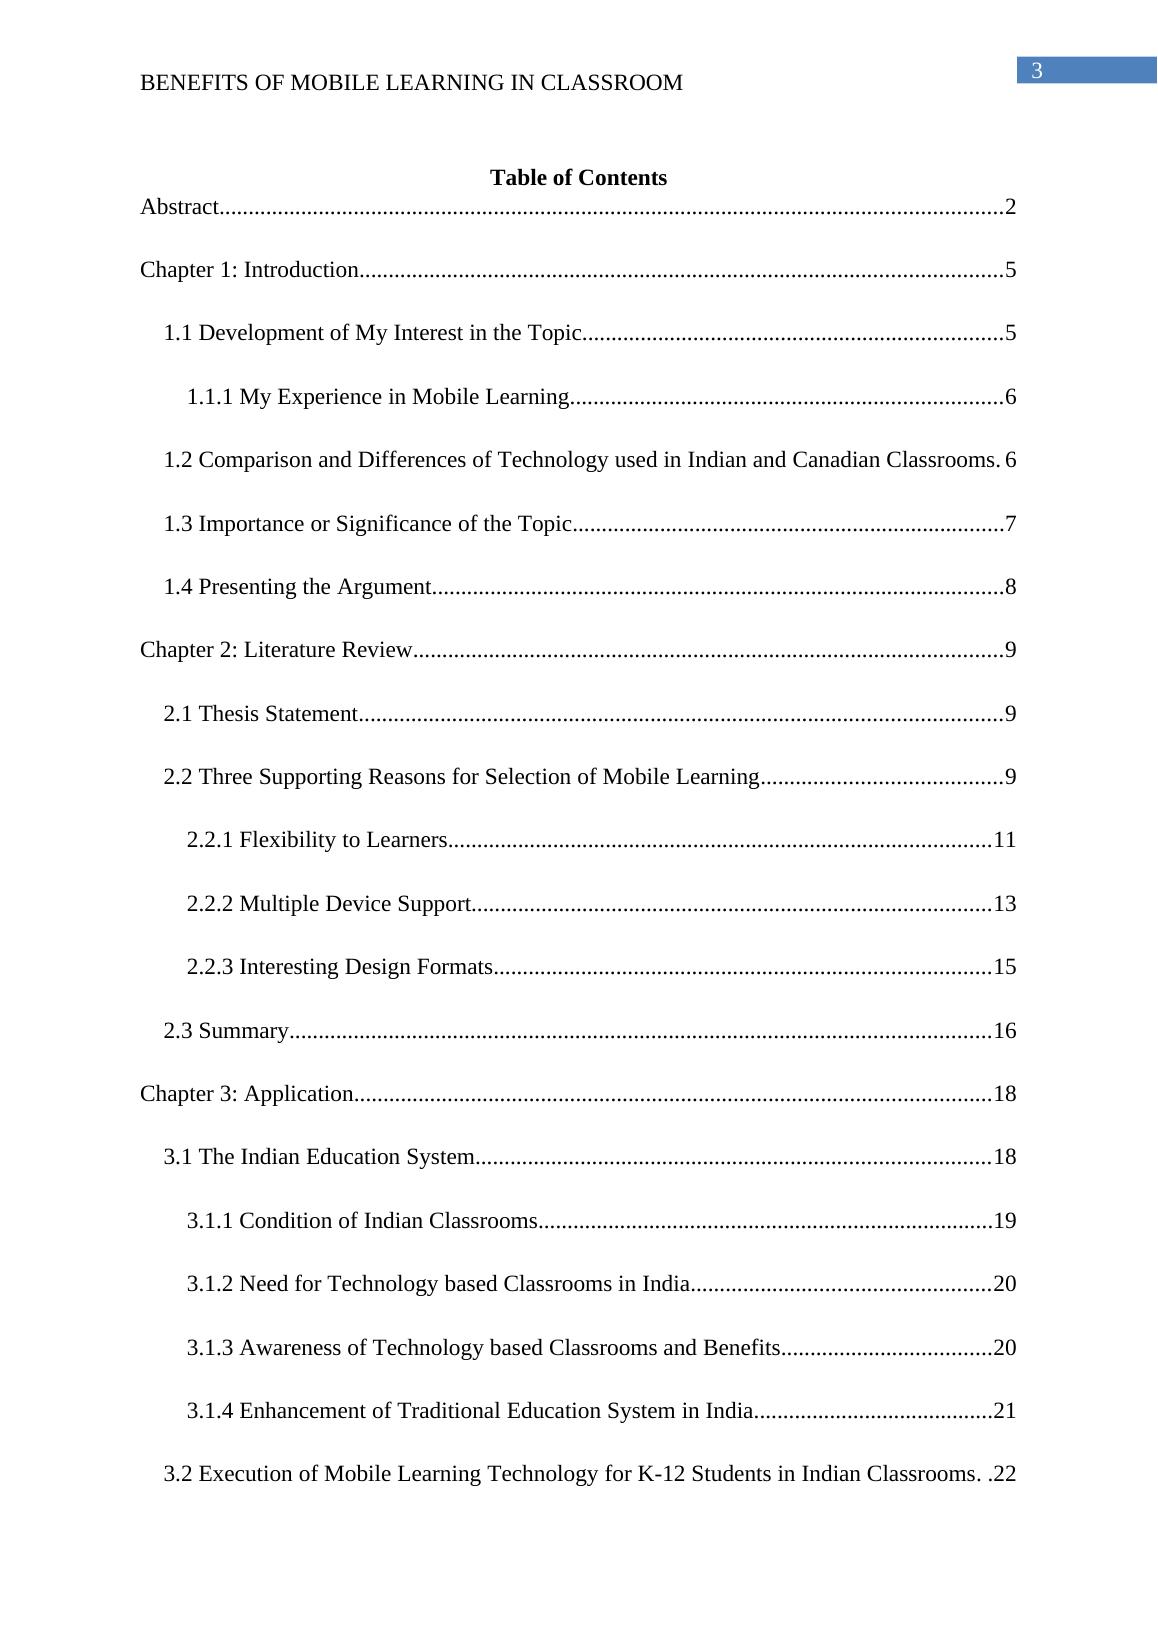 The objective of this thesis paper is to set in the content of mobile learning benefits_3